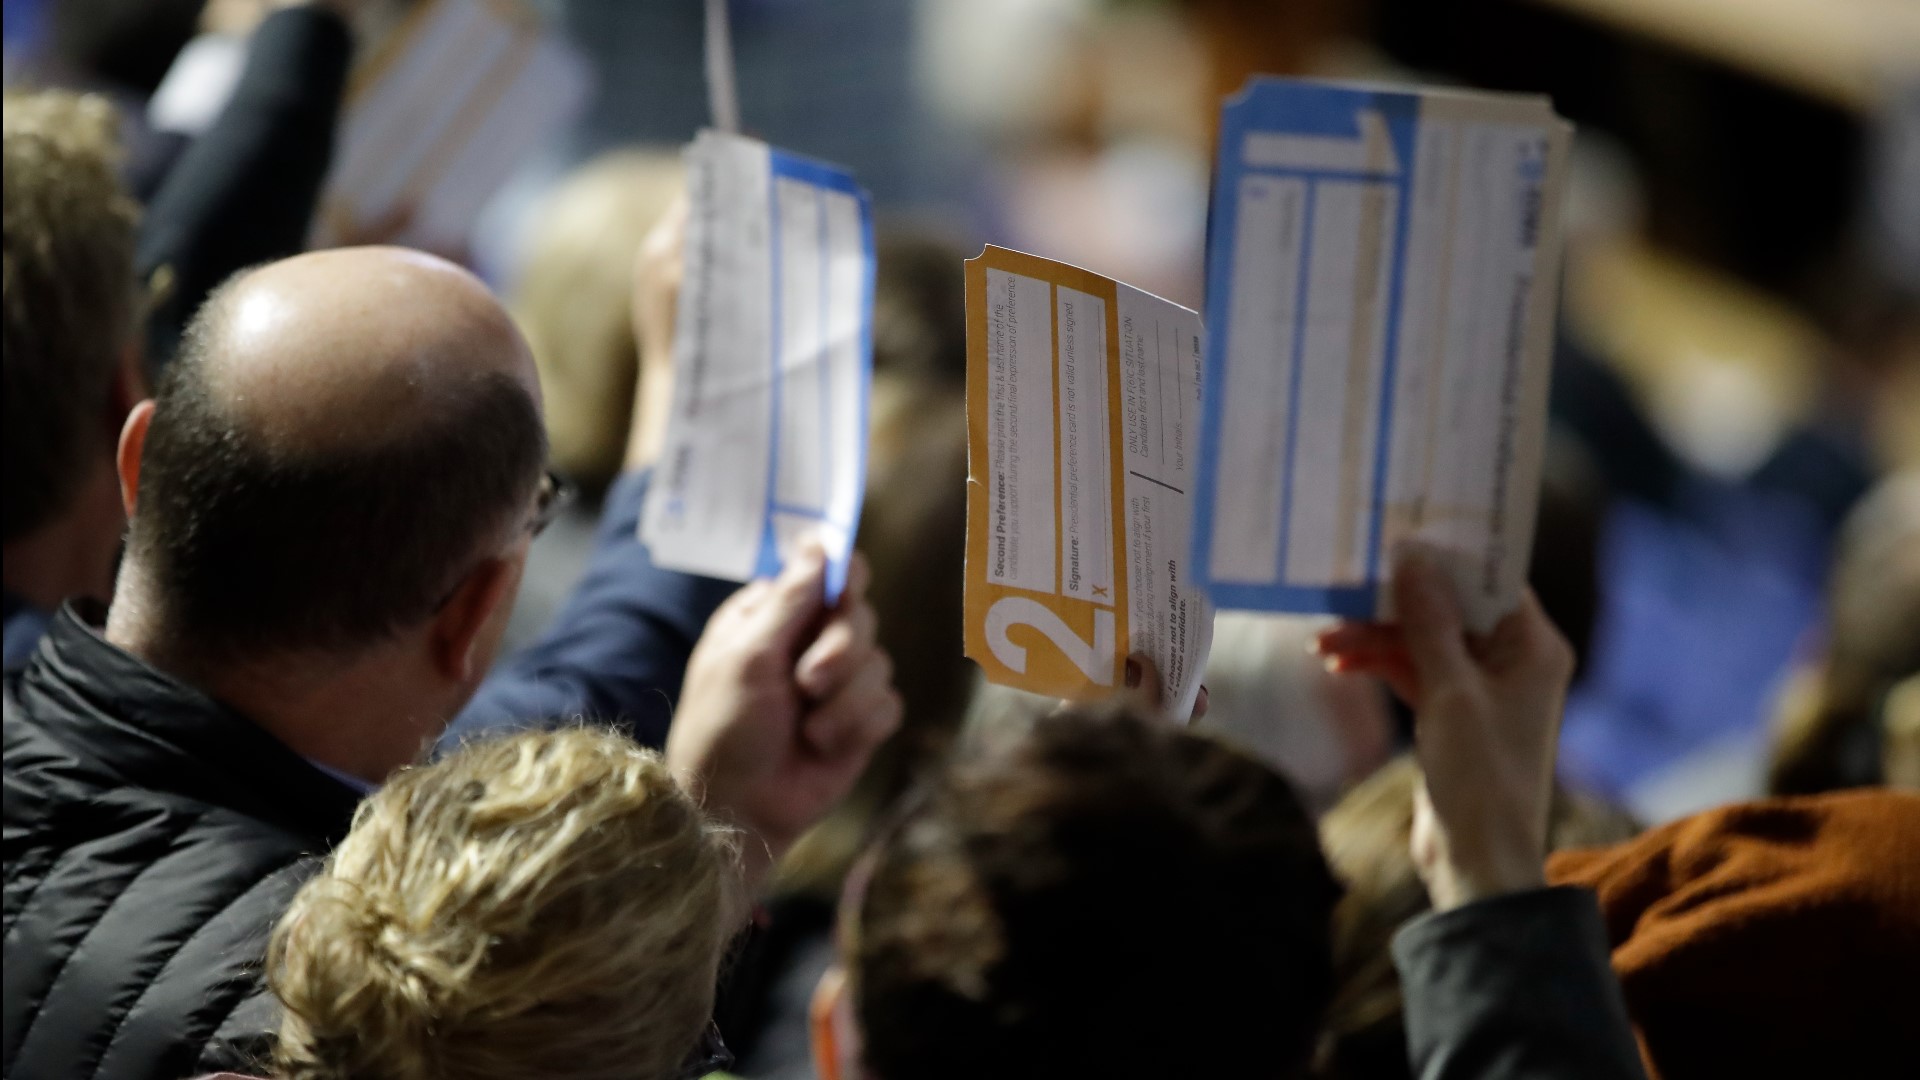 Despite setting the date for in-person precinct caucuses, it is unclear how Iowa Democrats plan to proceed with the proposed mail-in portion of the caucuses.